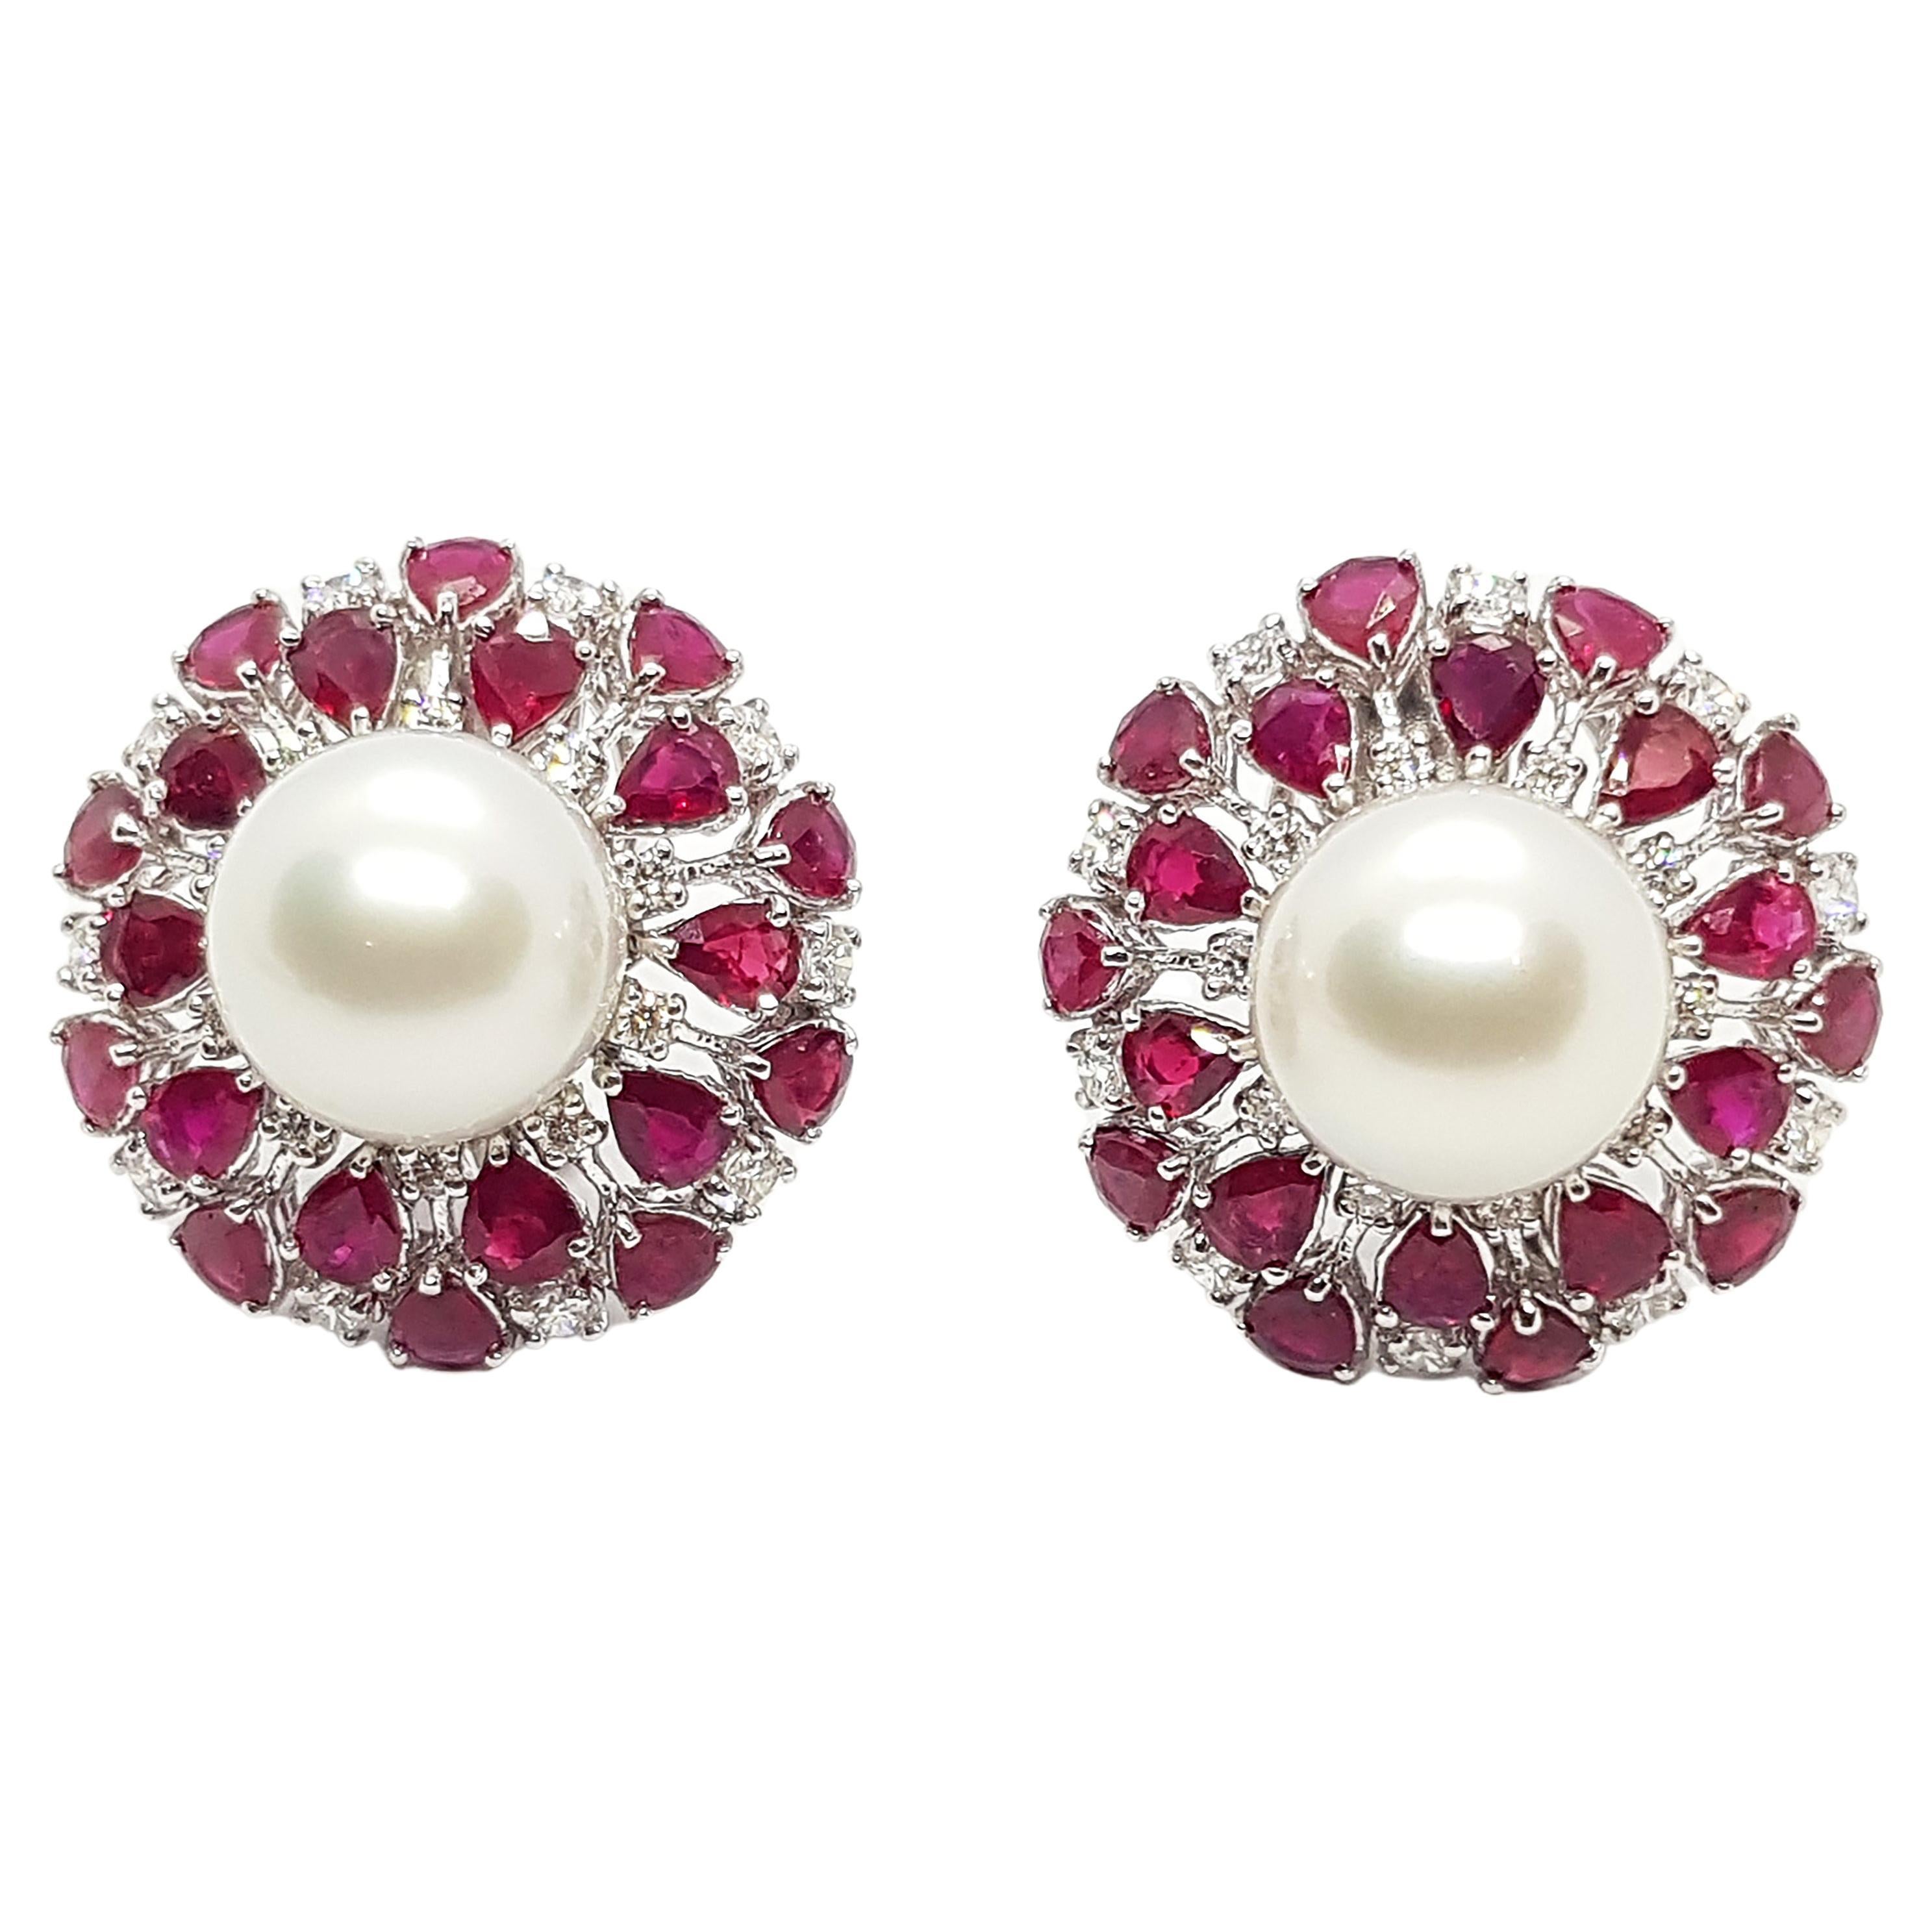 South Sea Pearl with Ruby and Diamond Earrings Set in 18 Karat White Gold